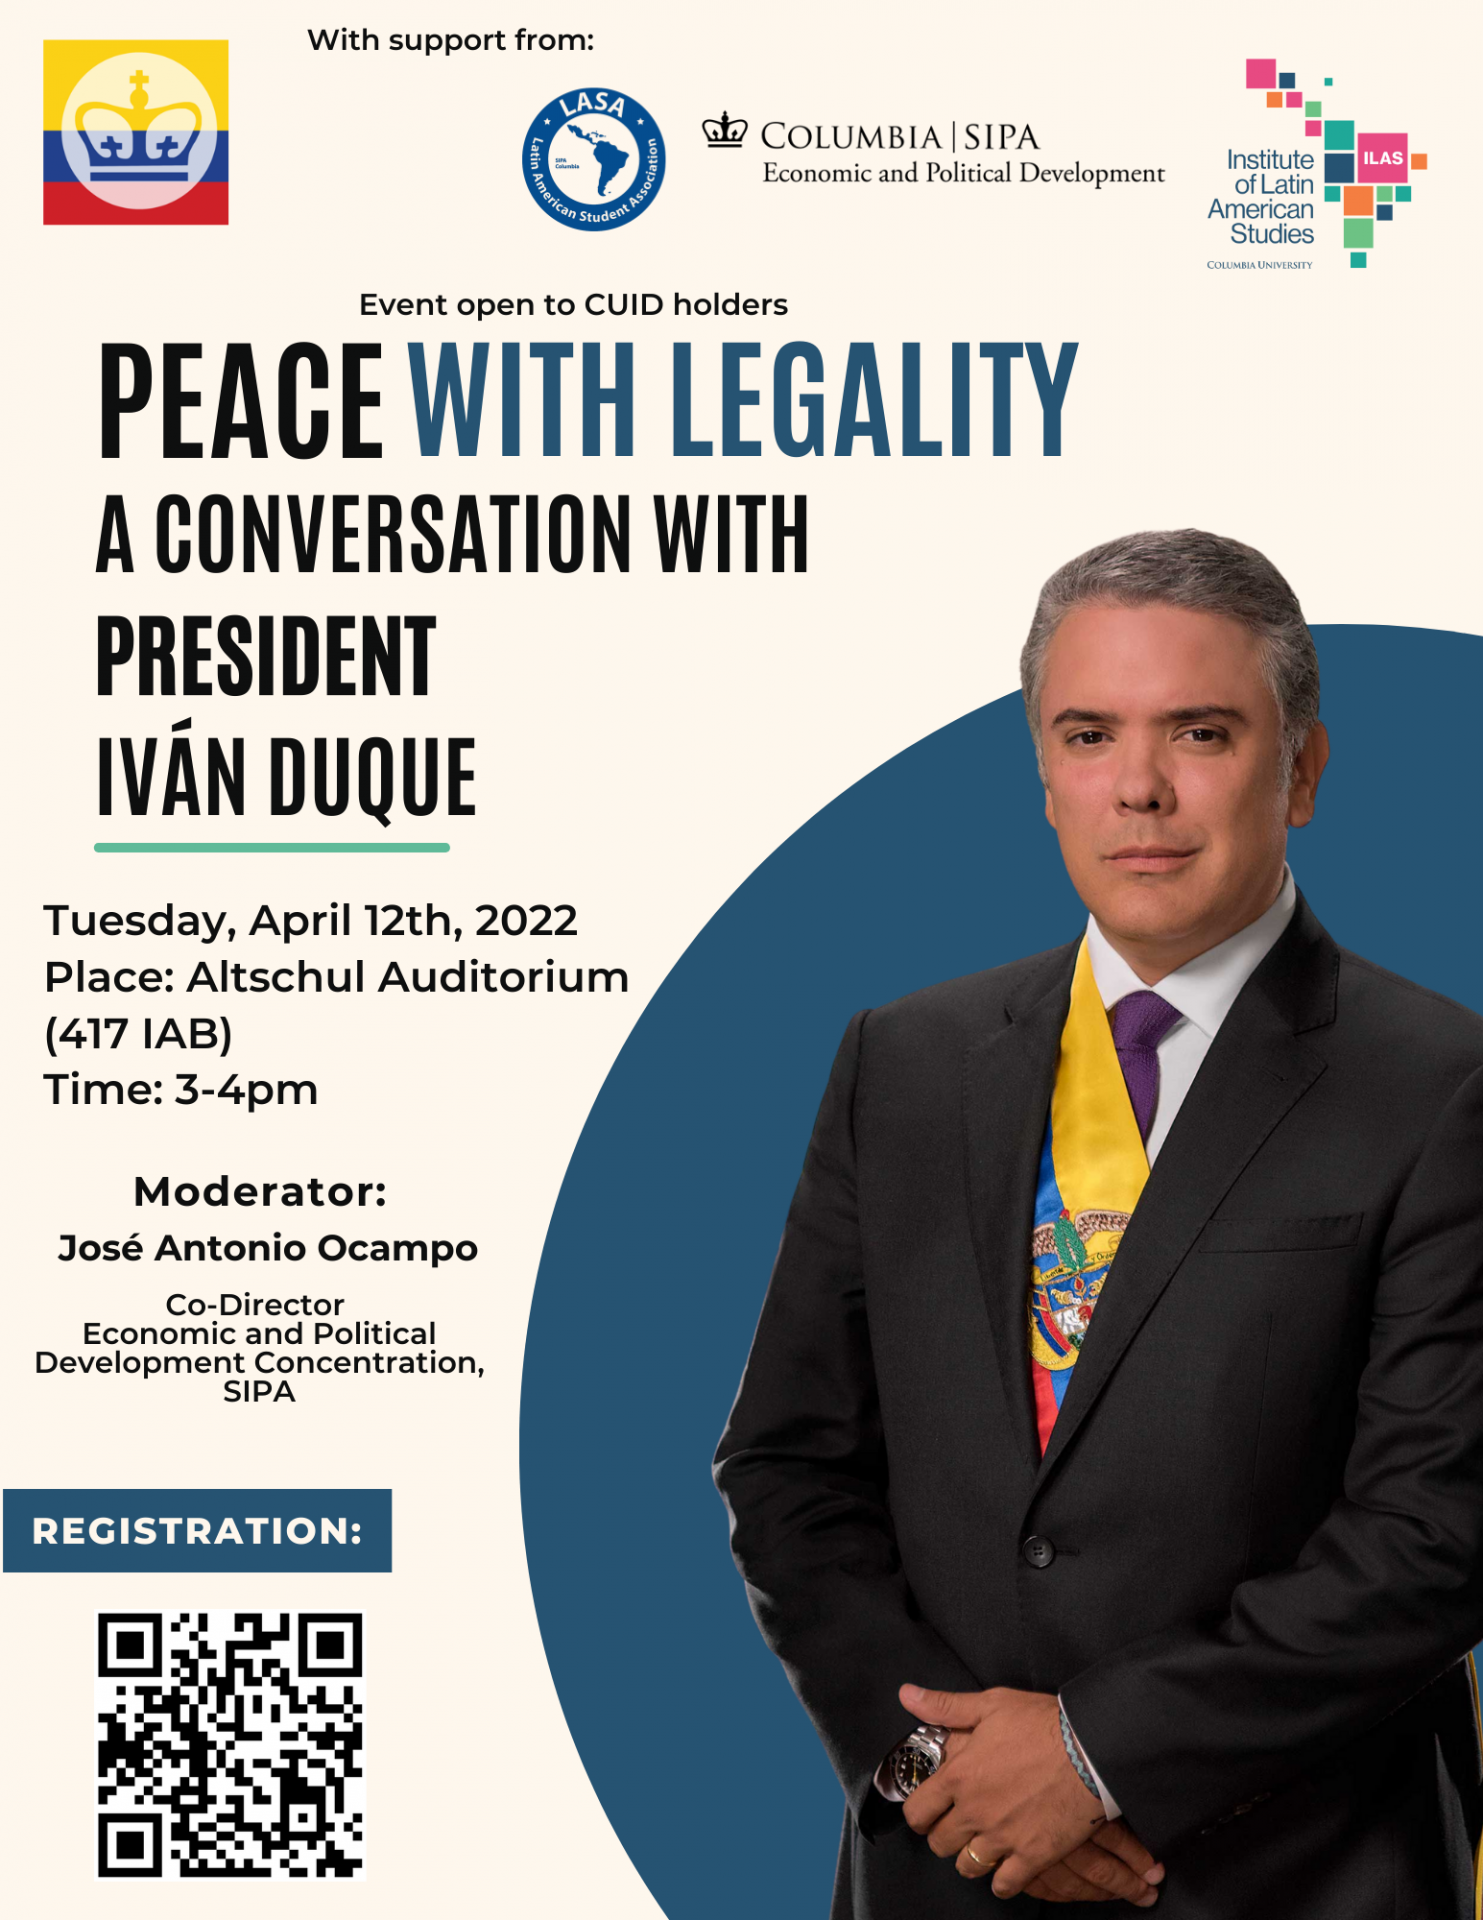 Flyer for the event featuring the title "Peace with Legality: a conversation with President Iván Duque" and a photo of the president standing in a suit. It also features the logos of the co-sponsors of the event: ILAS, Columbia SIPA Economic and Political Development, Latin American Students Association, and Colombians at Columbia. 